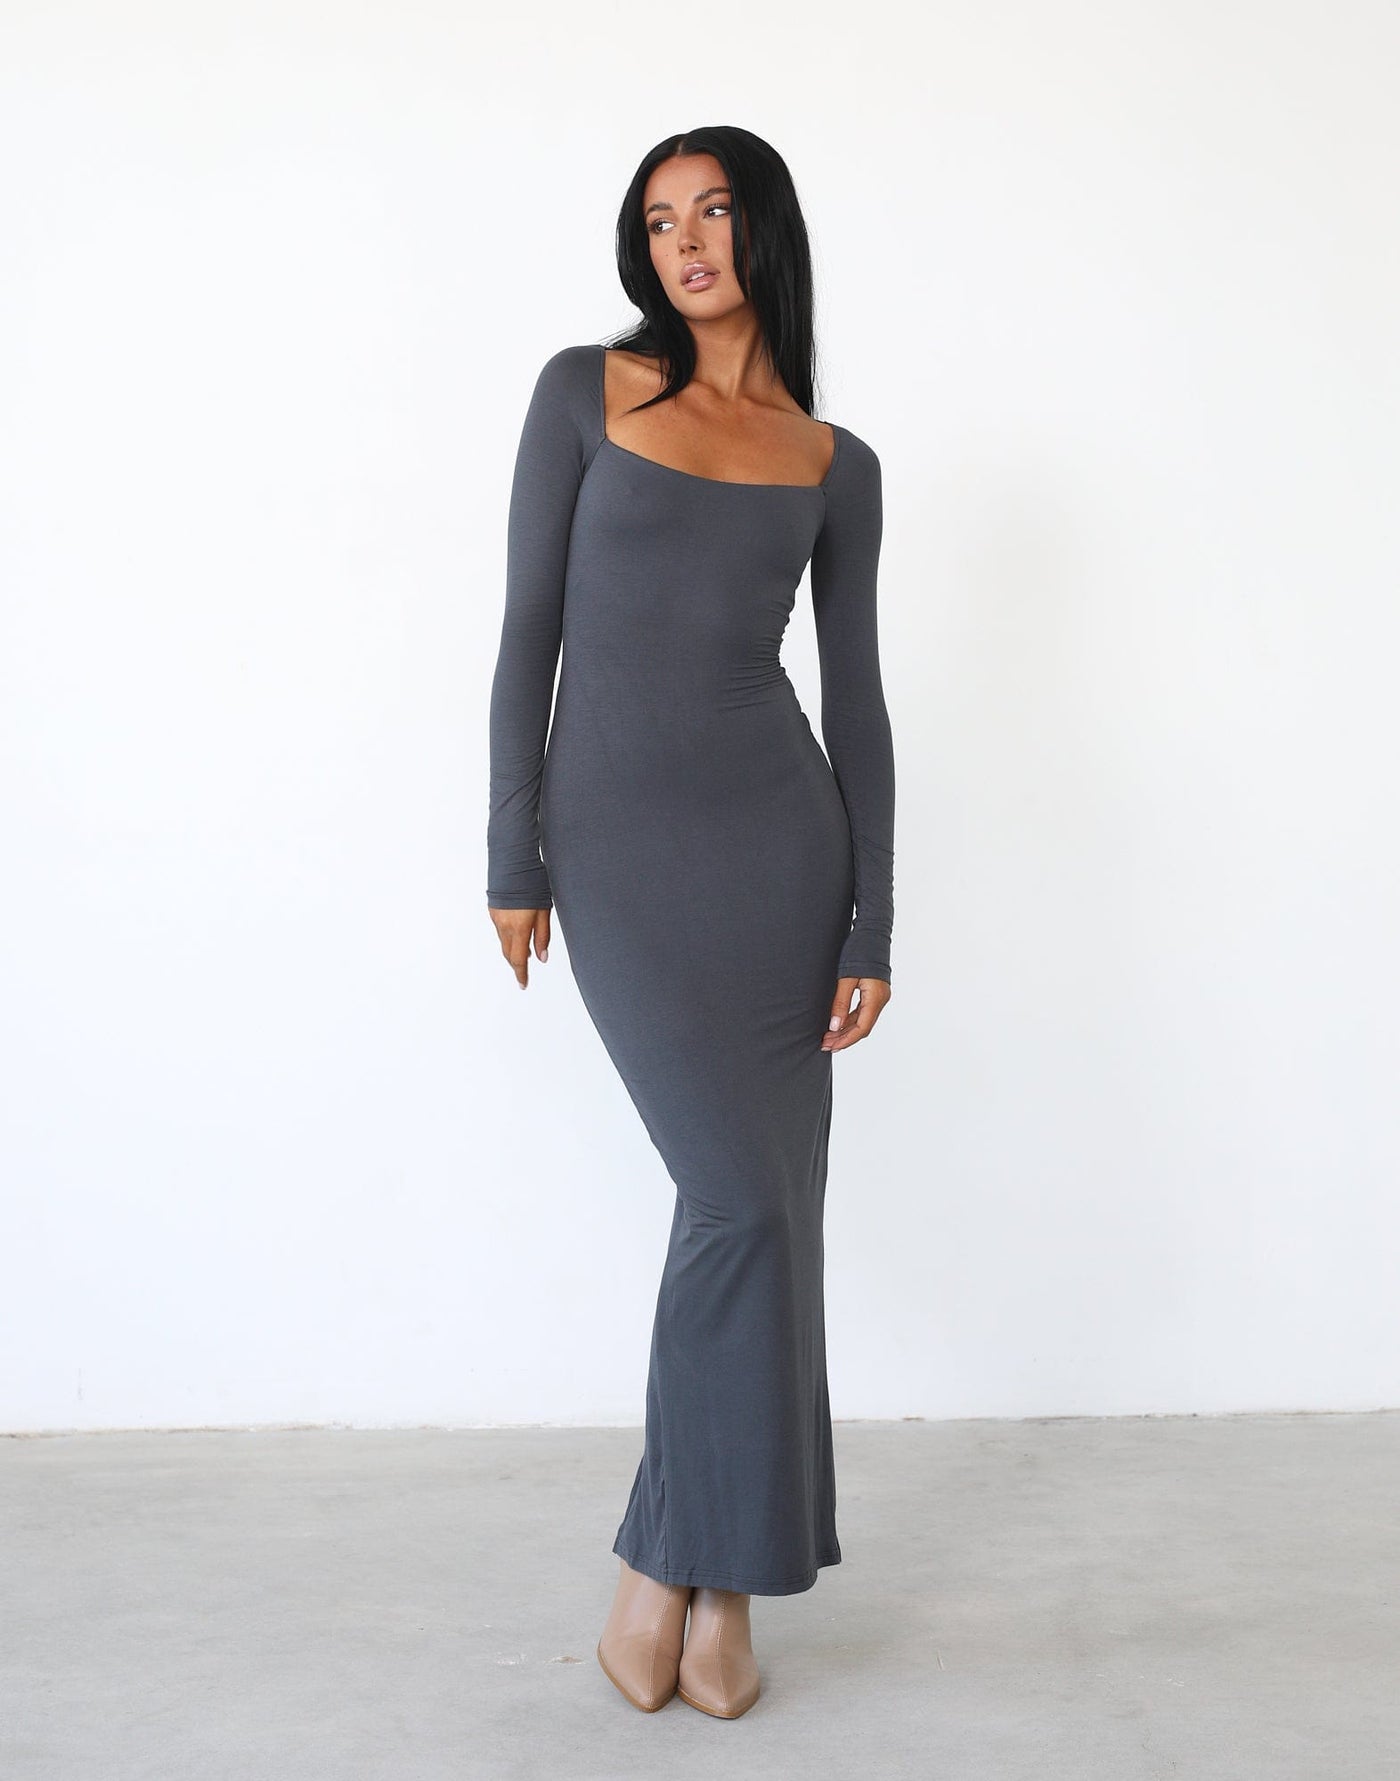 Eyes On Me Maxi Dress (Charcoal) - Long Sleeved Fitted Square Neck Maxi - Women's Dress - Charcoal Clothing